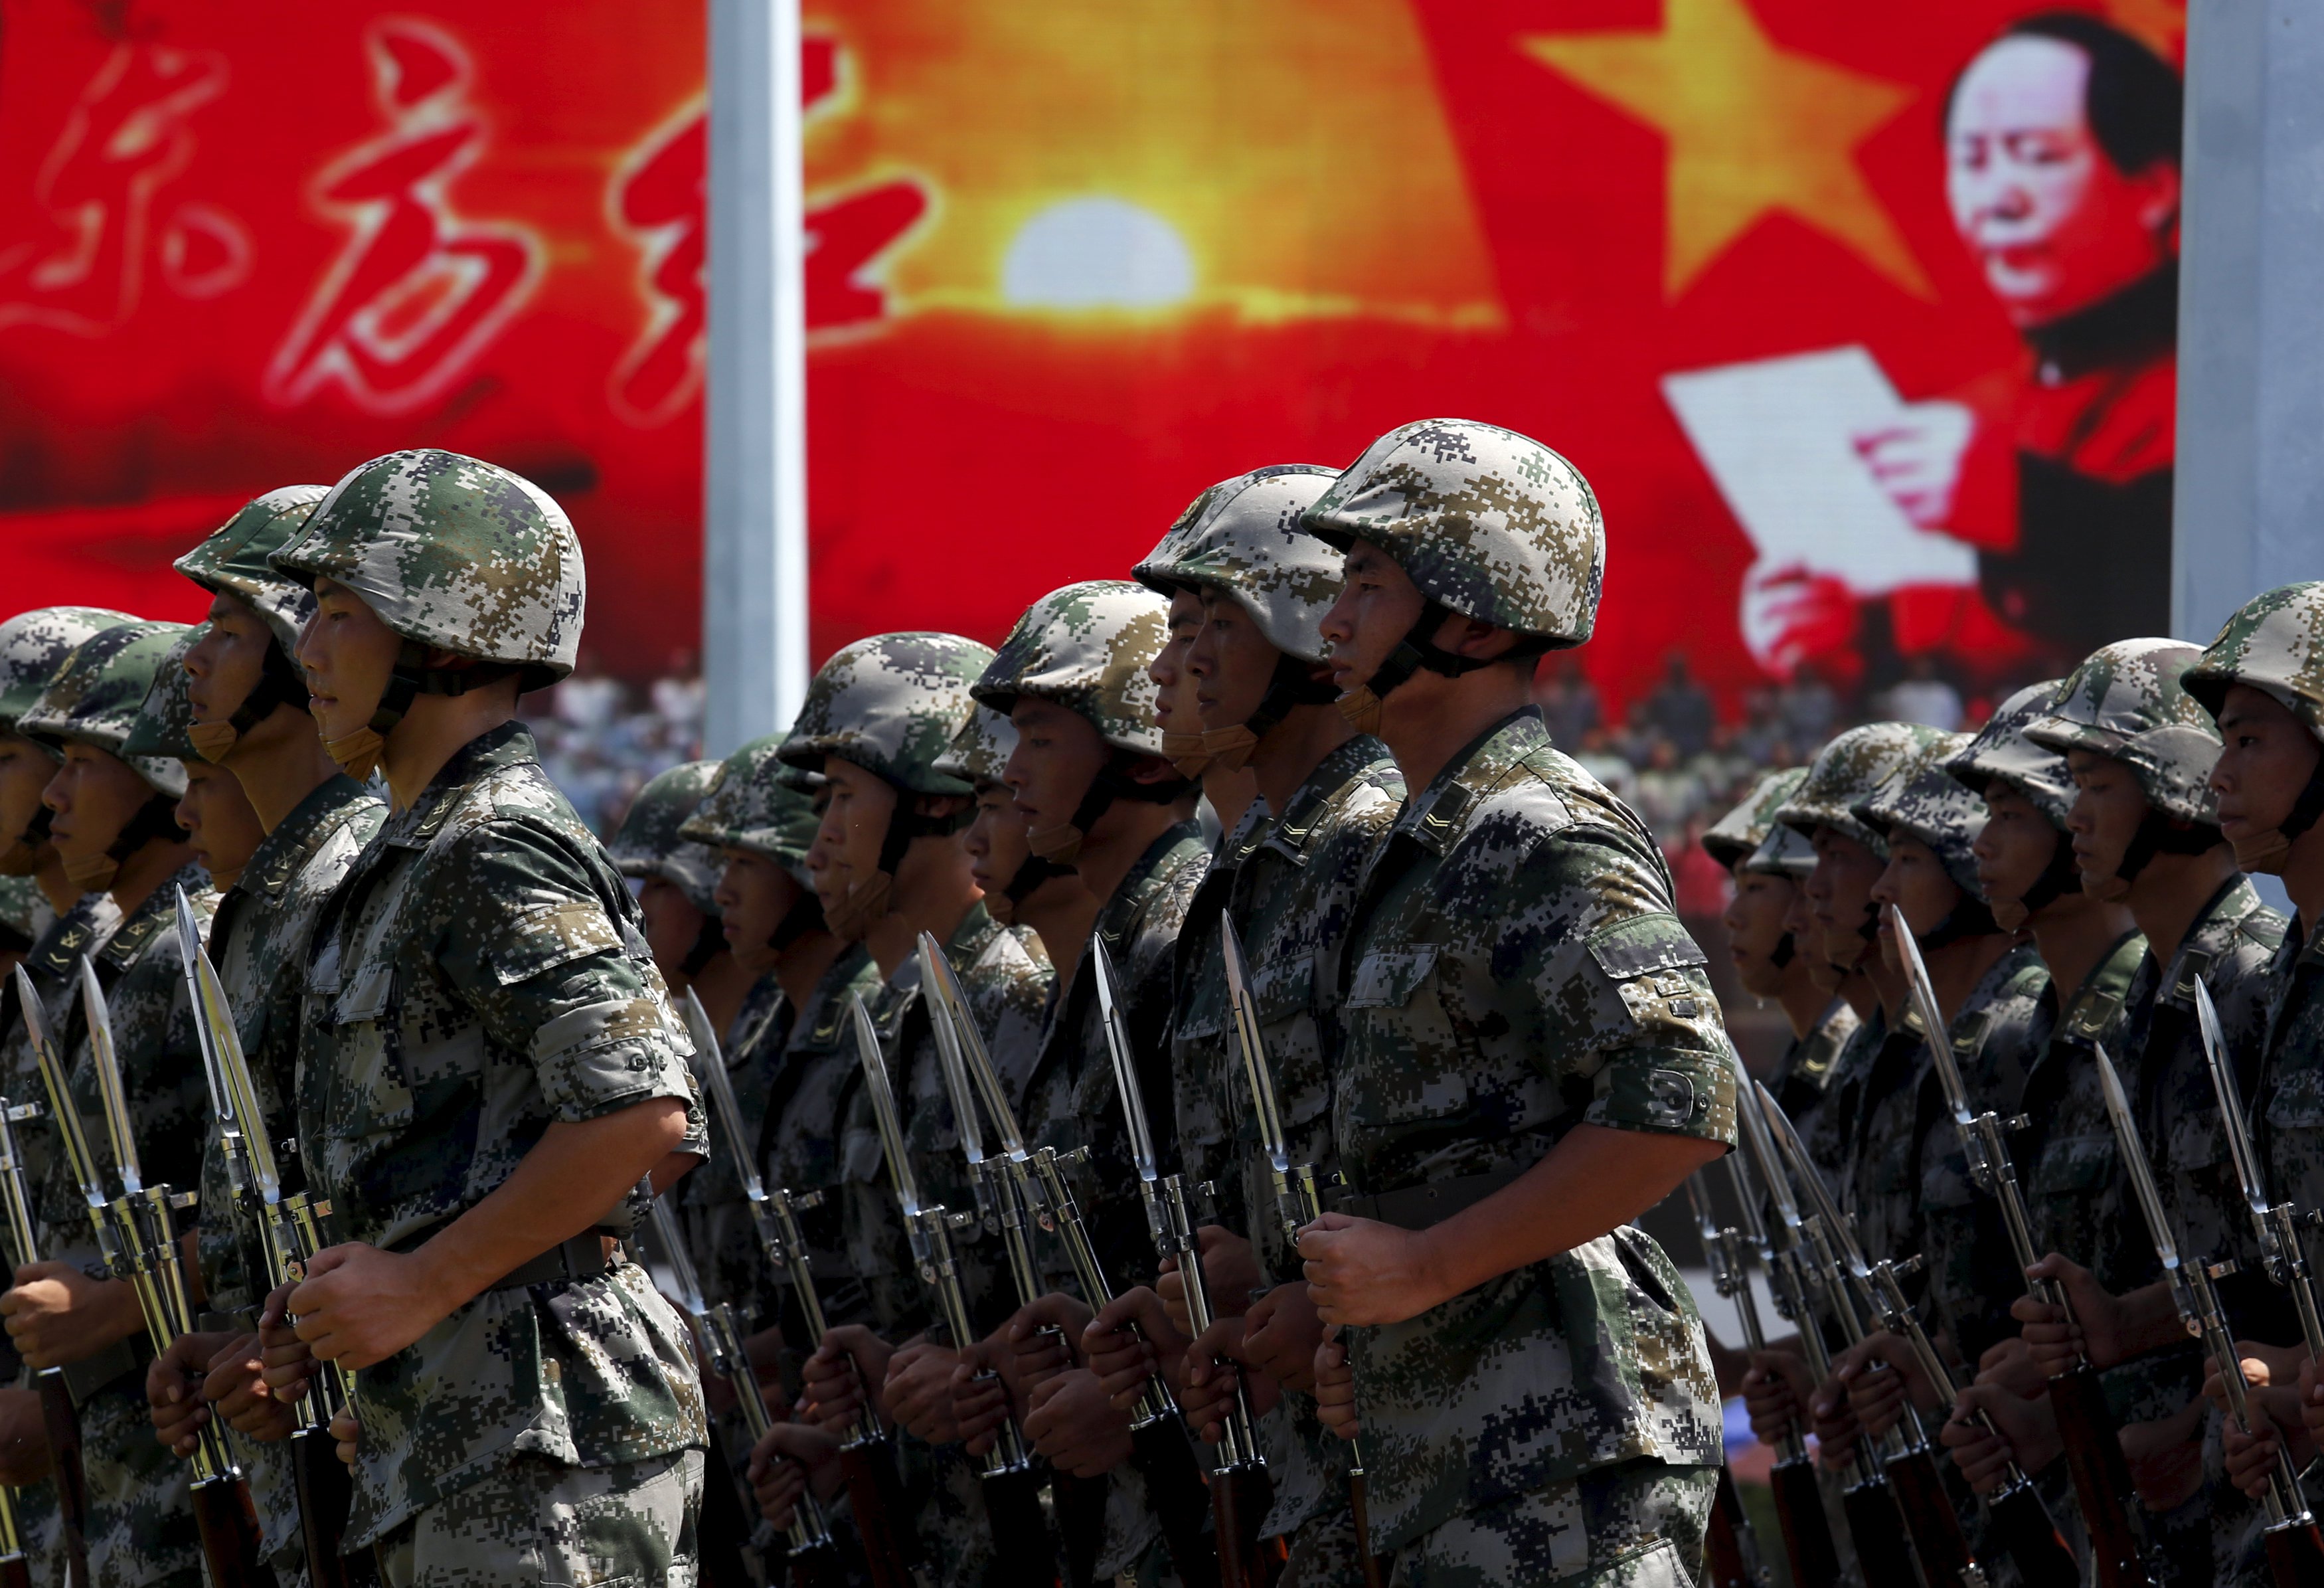 People's Liberation Army soldiers stationed in Hong Kong take part in a ceremony to mark the 18th anniversary of the handover on July 1. Photo: Reuters